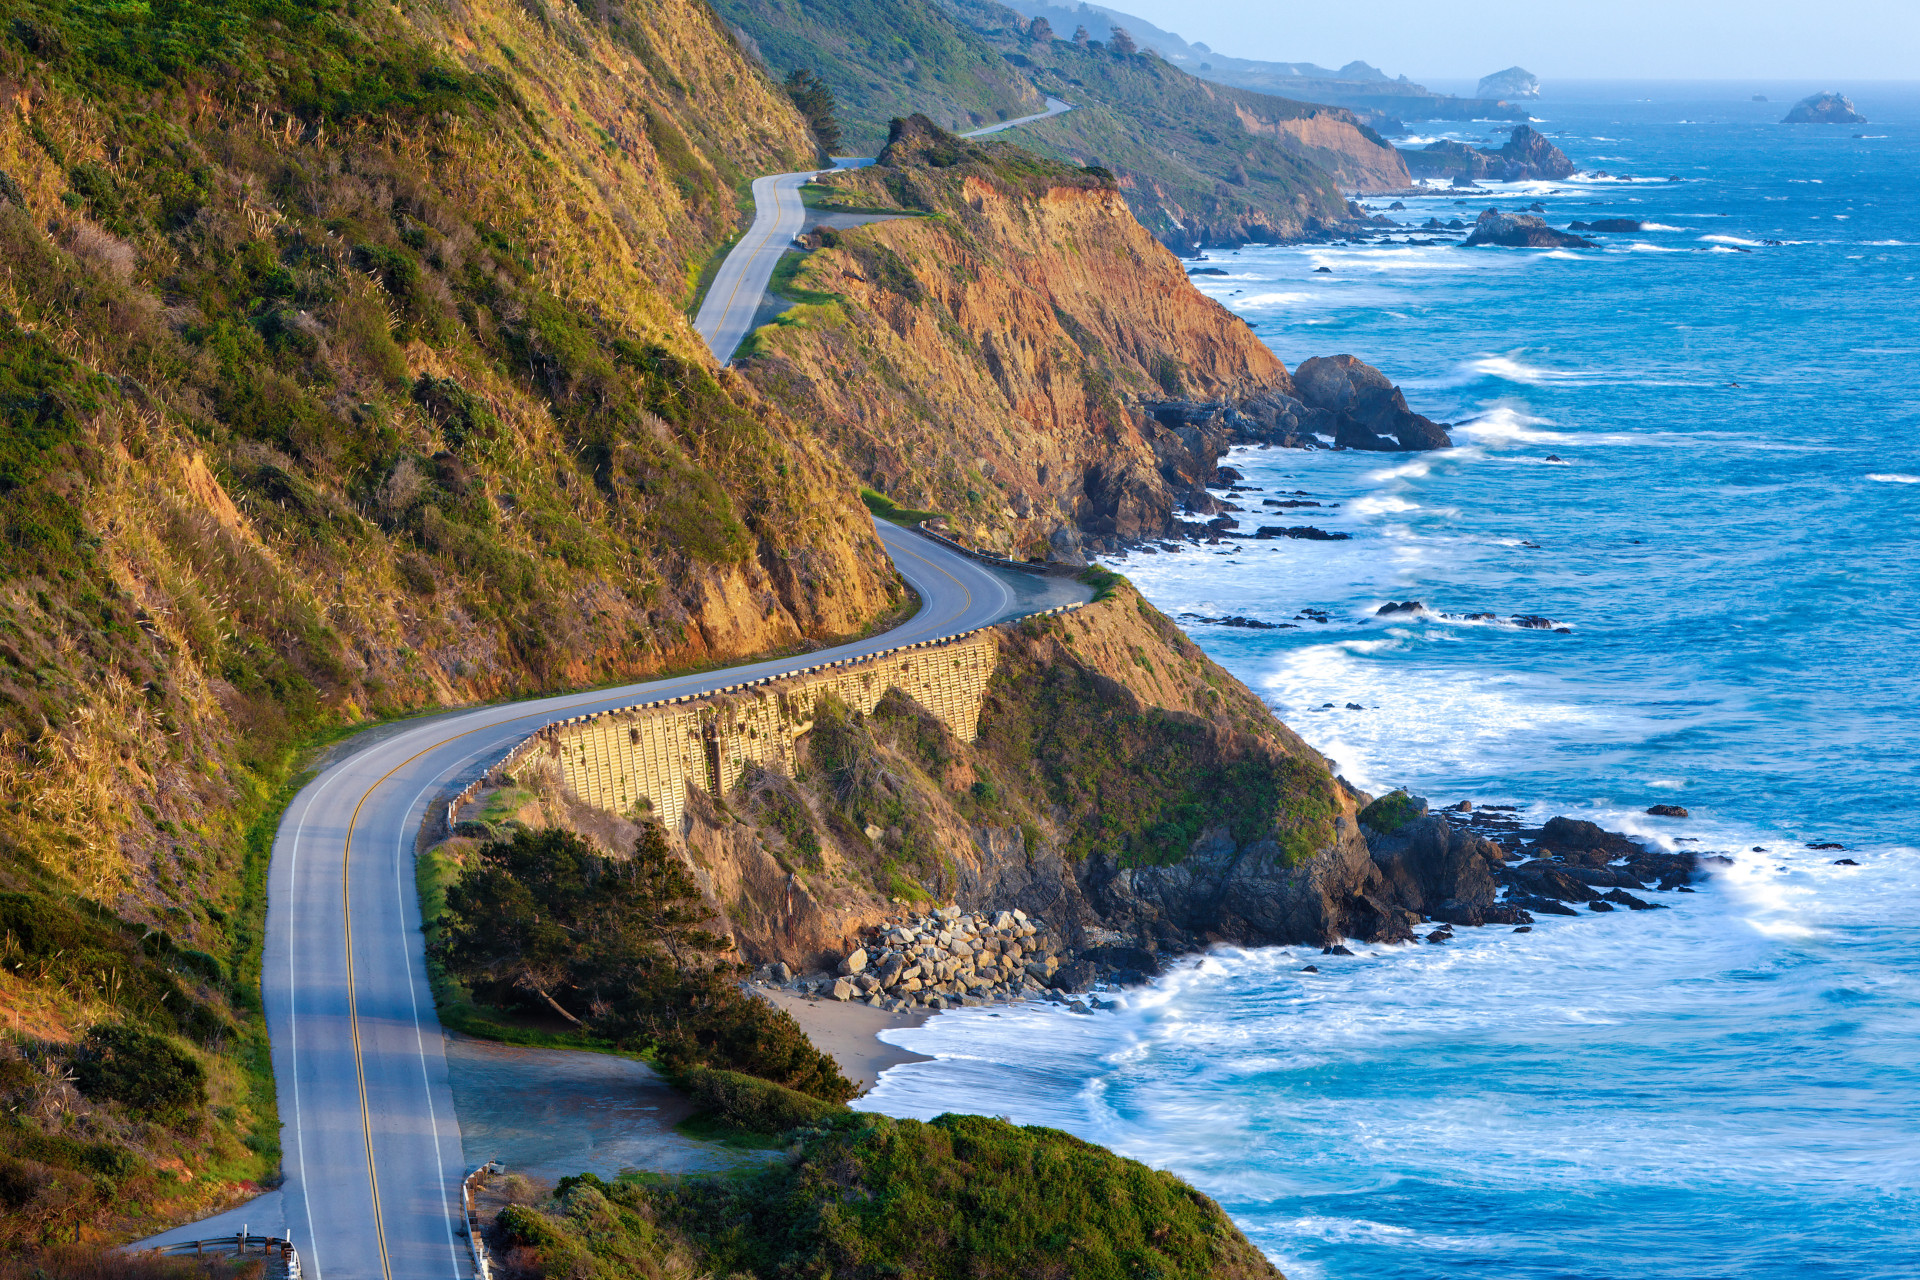 The iconic Highway 1 is about as beautiful as a road trip can get.<p>You may also like:<a href="https://www.starsinsider.com/n/353734?utm_source=msn.com&utm_medium=display&utm_campaign=referral_description&utm_content=162282v3en-au"> Jessica Alba's best looks through the years</a></p>